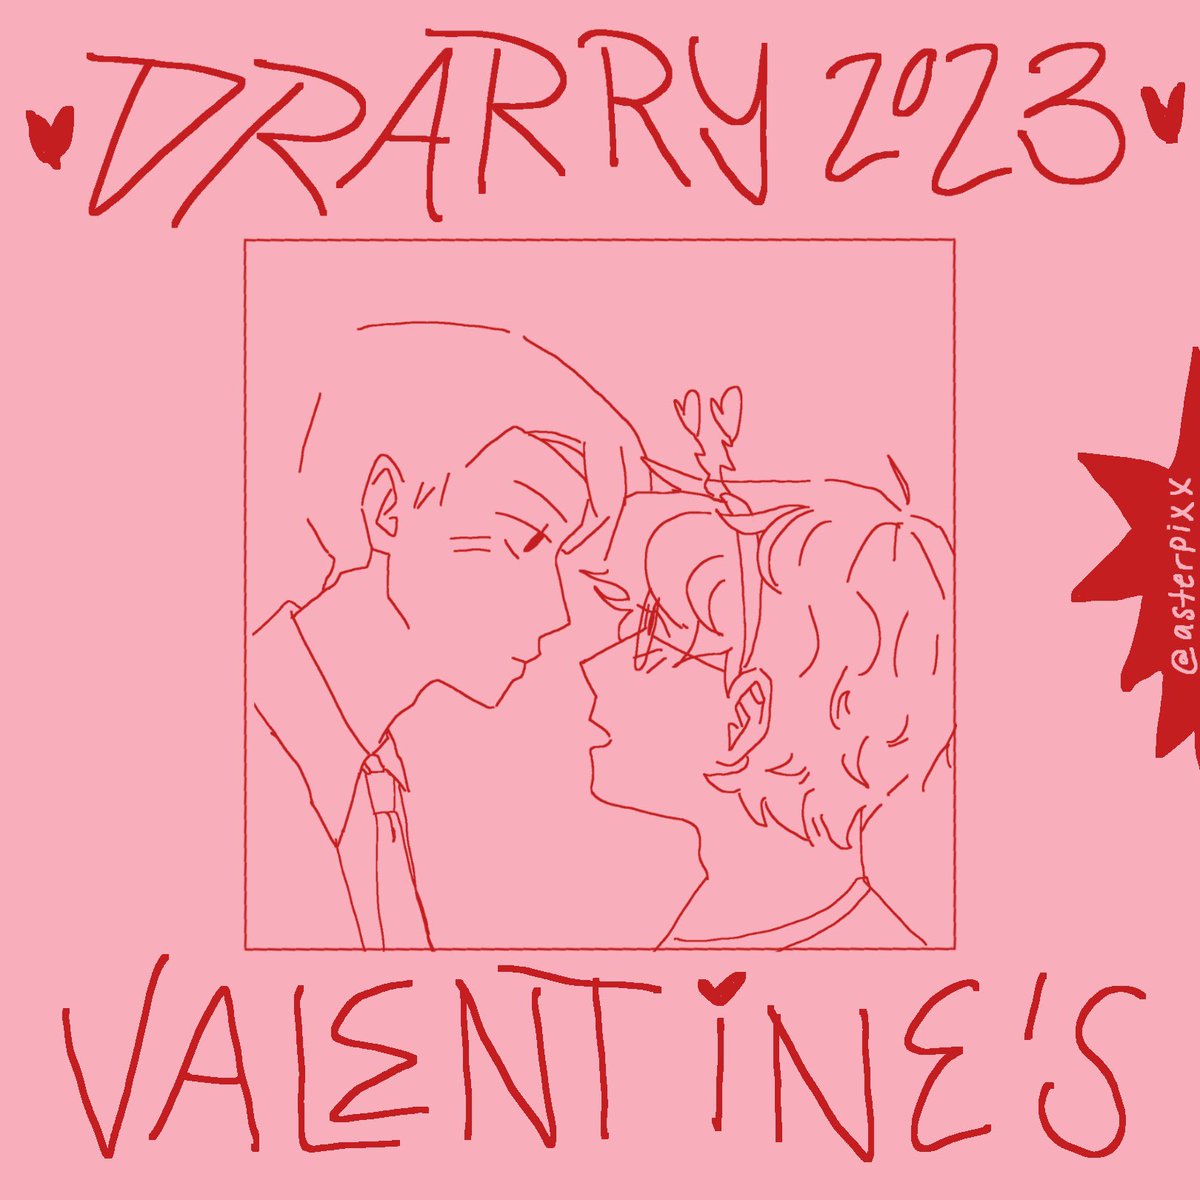 HAPPY VALENTINE’S DAY 💗💗💗 I LOVE YOU ALL <3 

OPEN THIS THREAD FOR A VALENTINE’S DAY INSPIRED DRARRY COMIC 
#DracoMalfoy #harrypotter #Harrypotterfanart #drarry